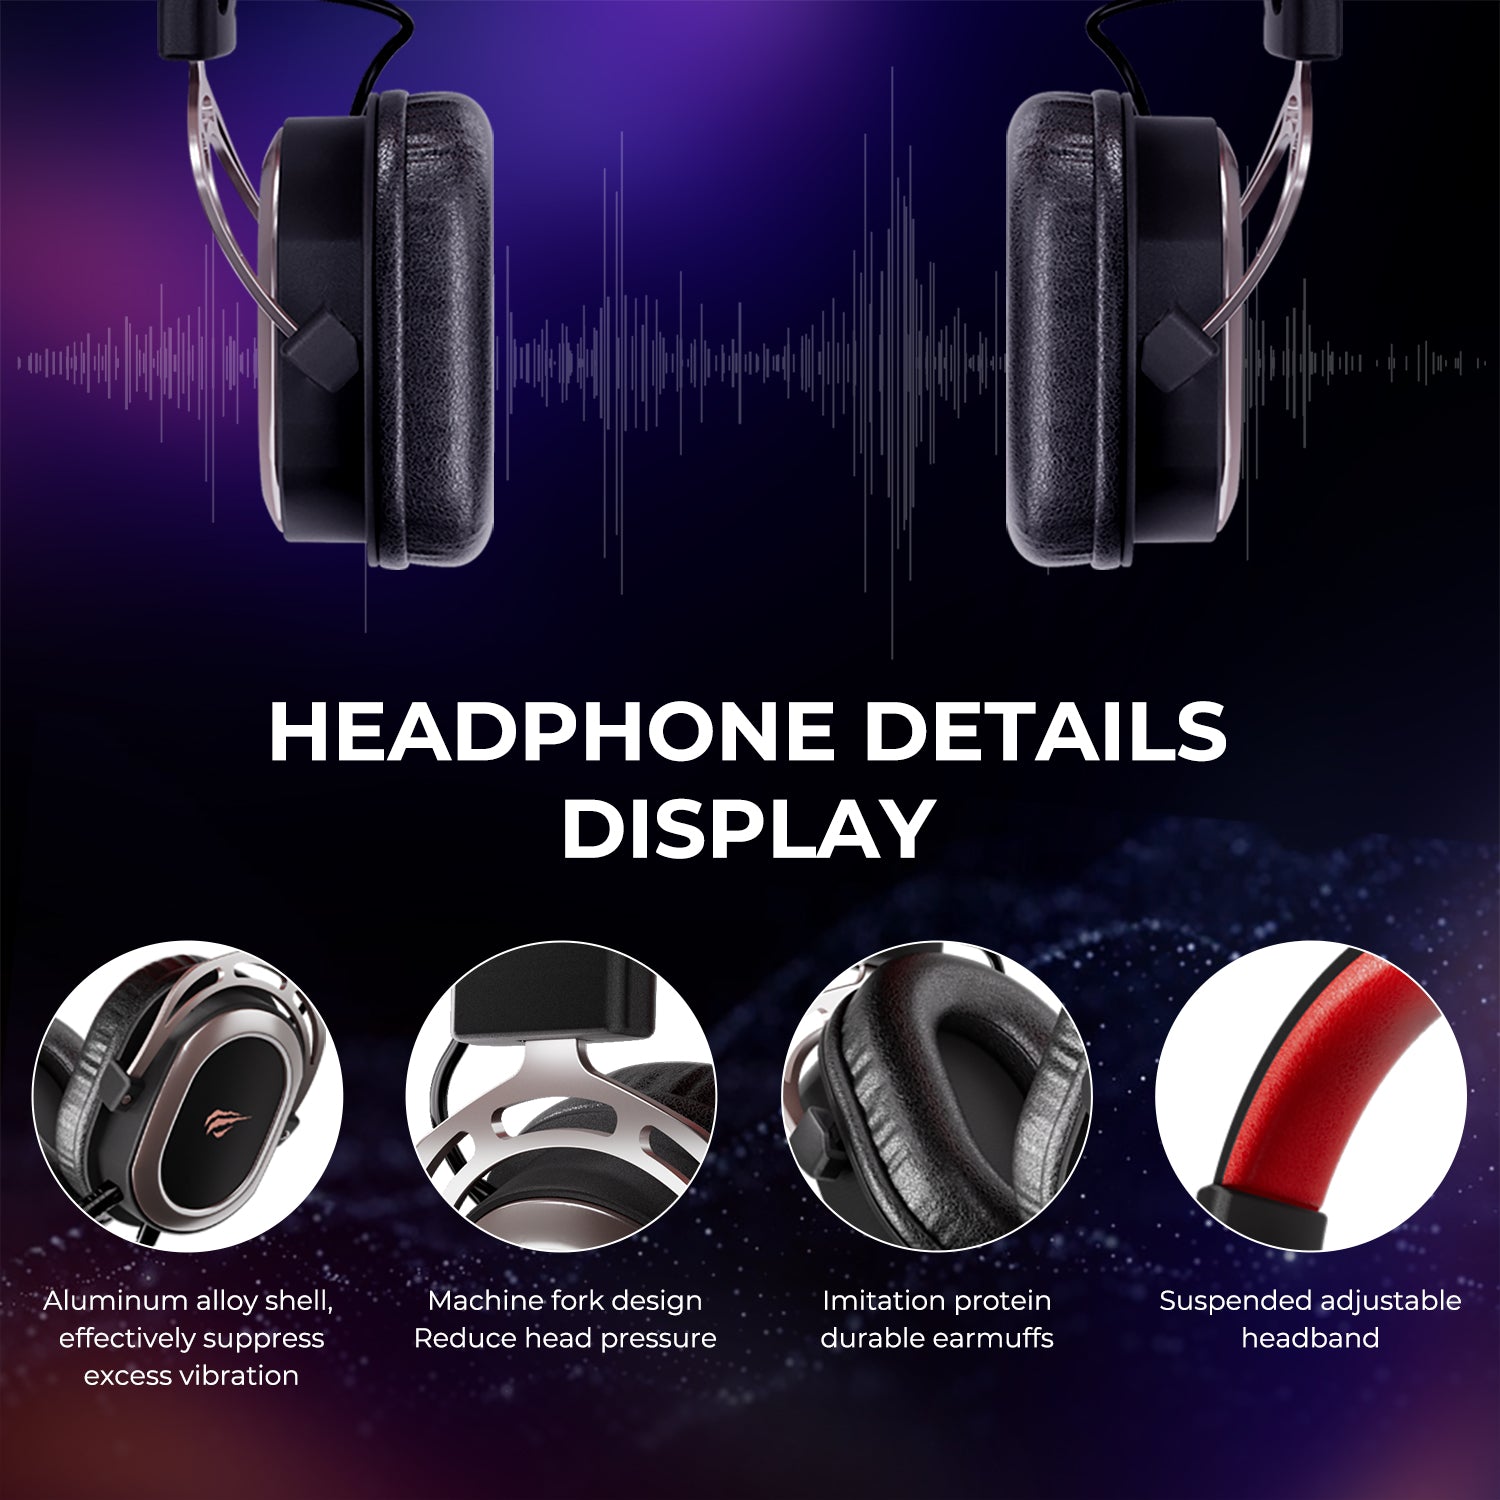 HAVIT H2008D Wired Gaming Headset with 3.5mm Plug 50mm Drivers Surround Sound HD Detachable Mic